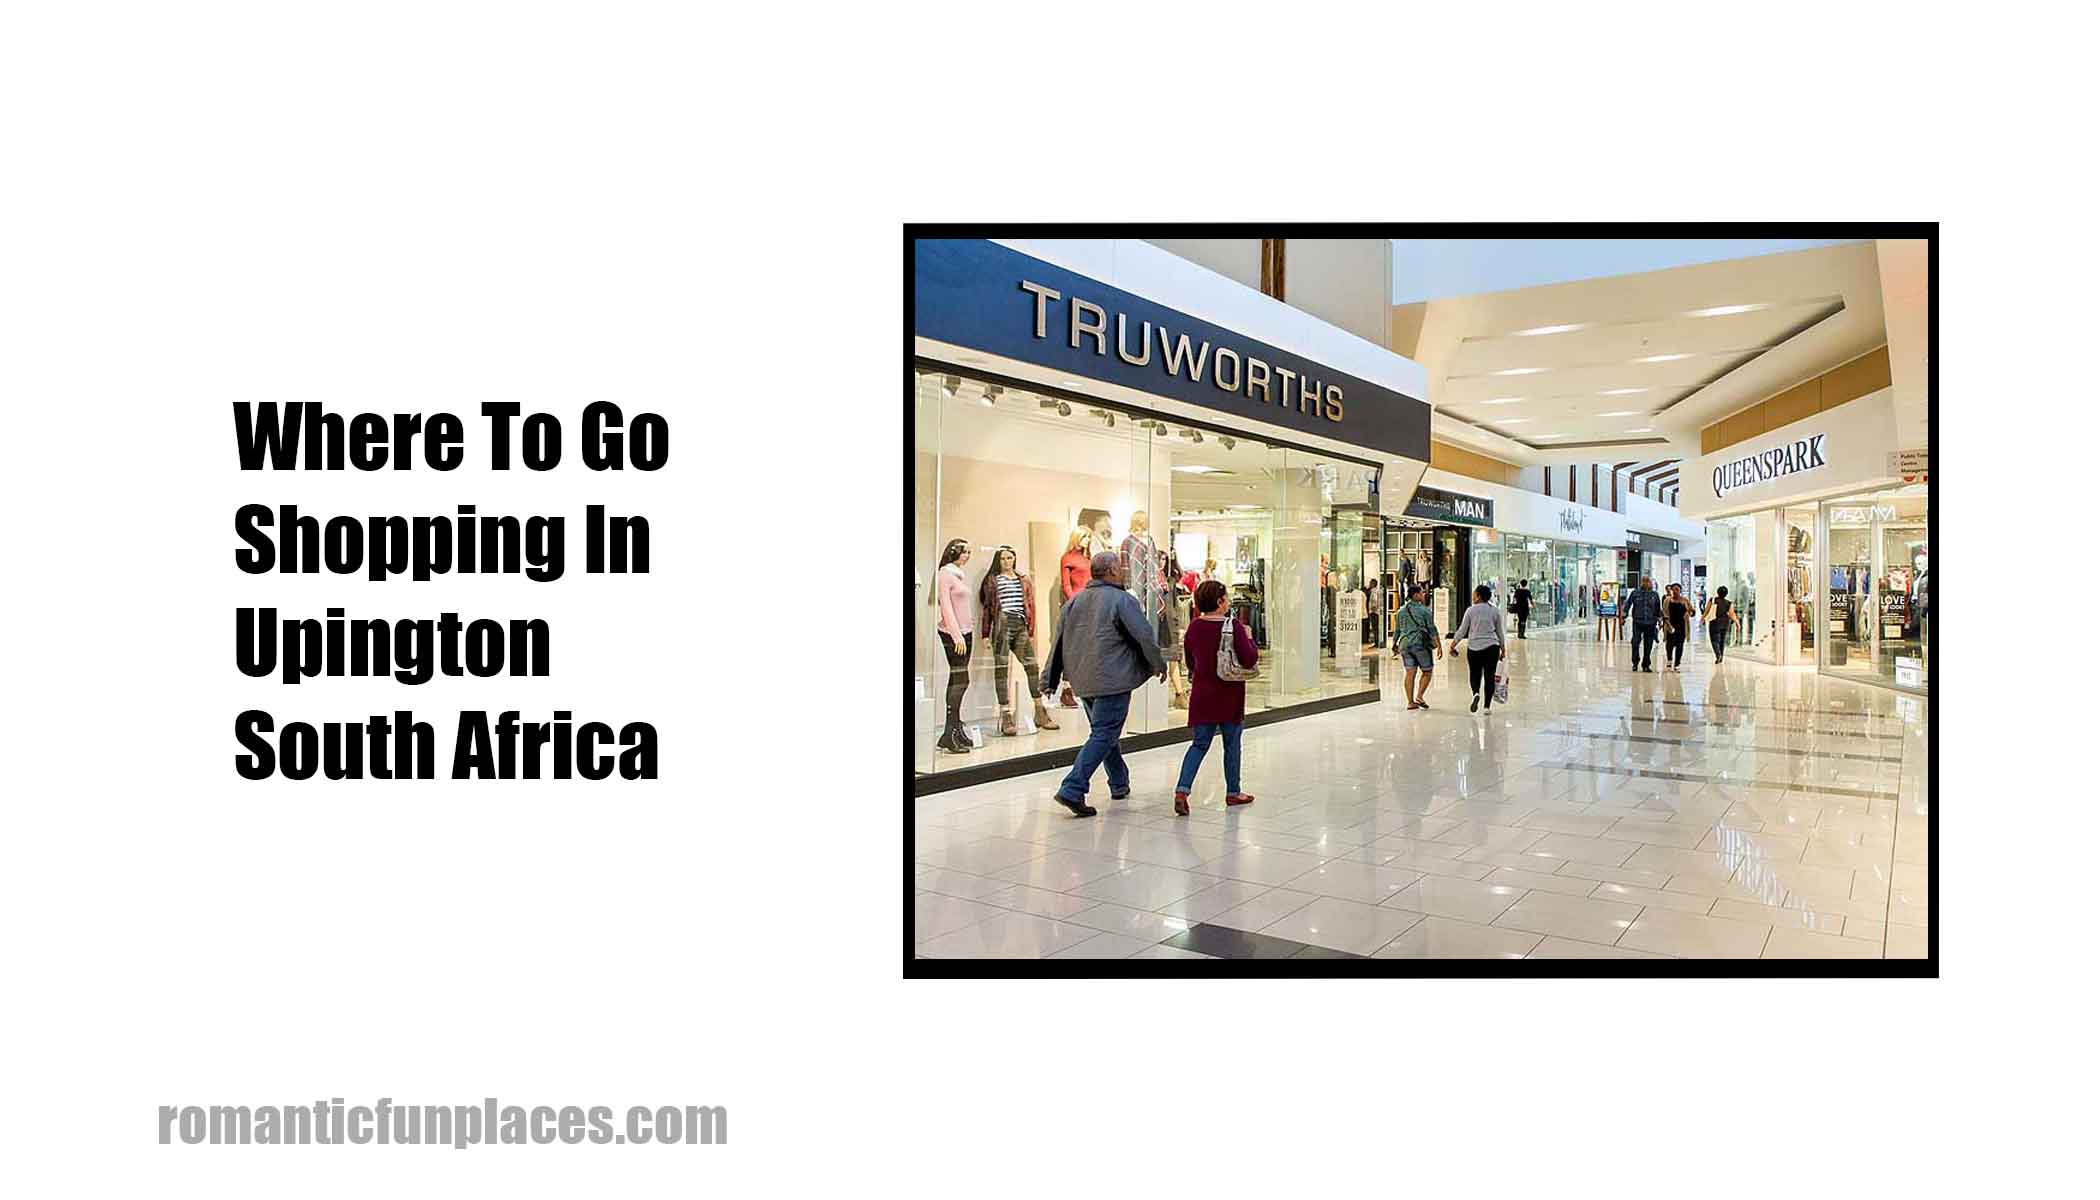 Where To Go Shopping In Upington South Africa